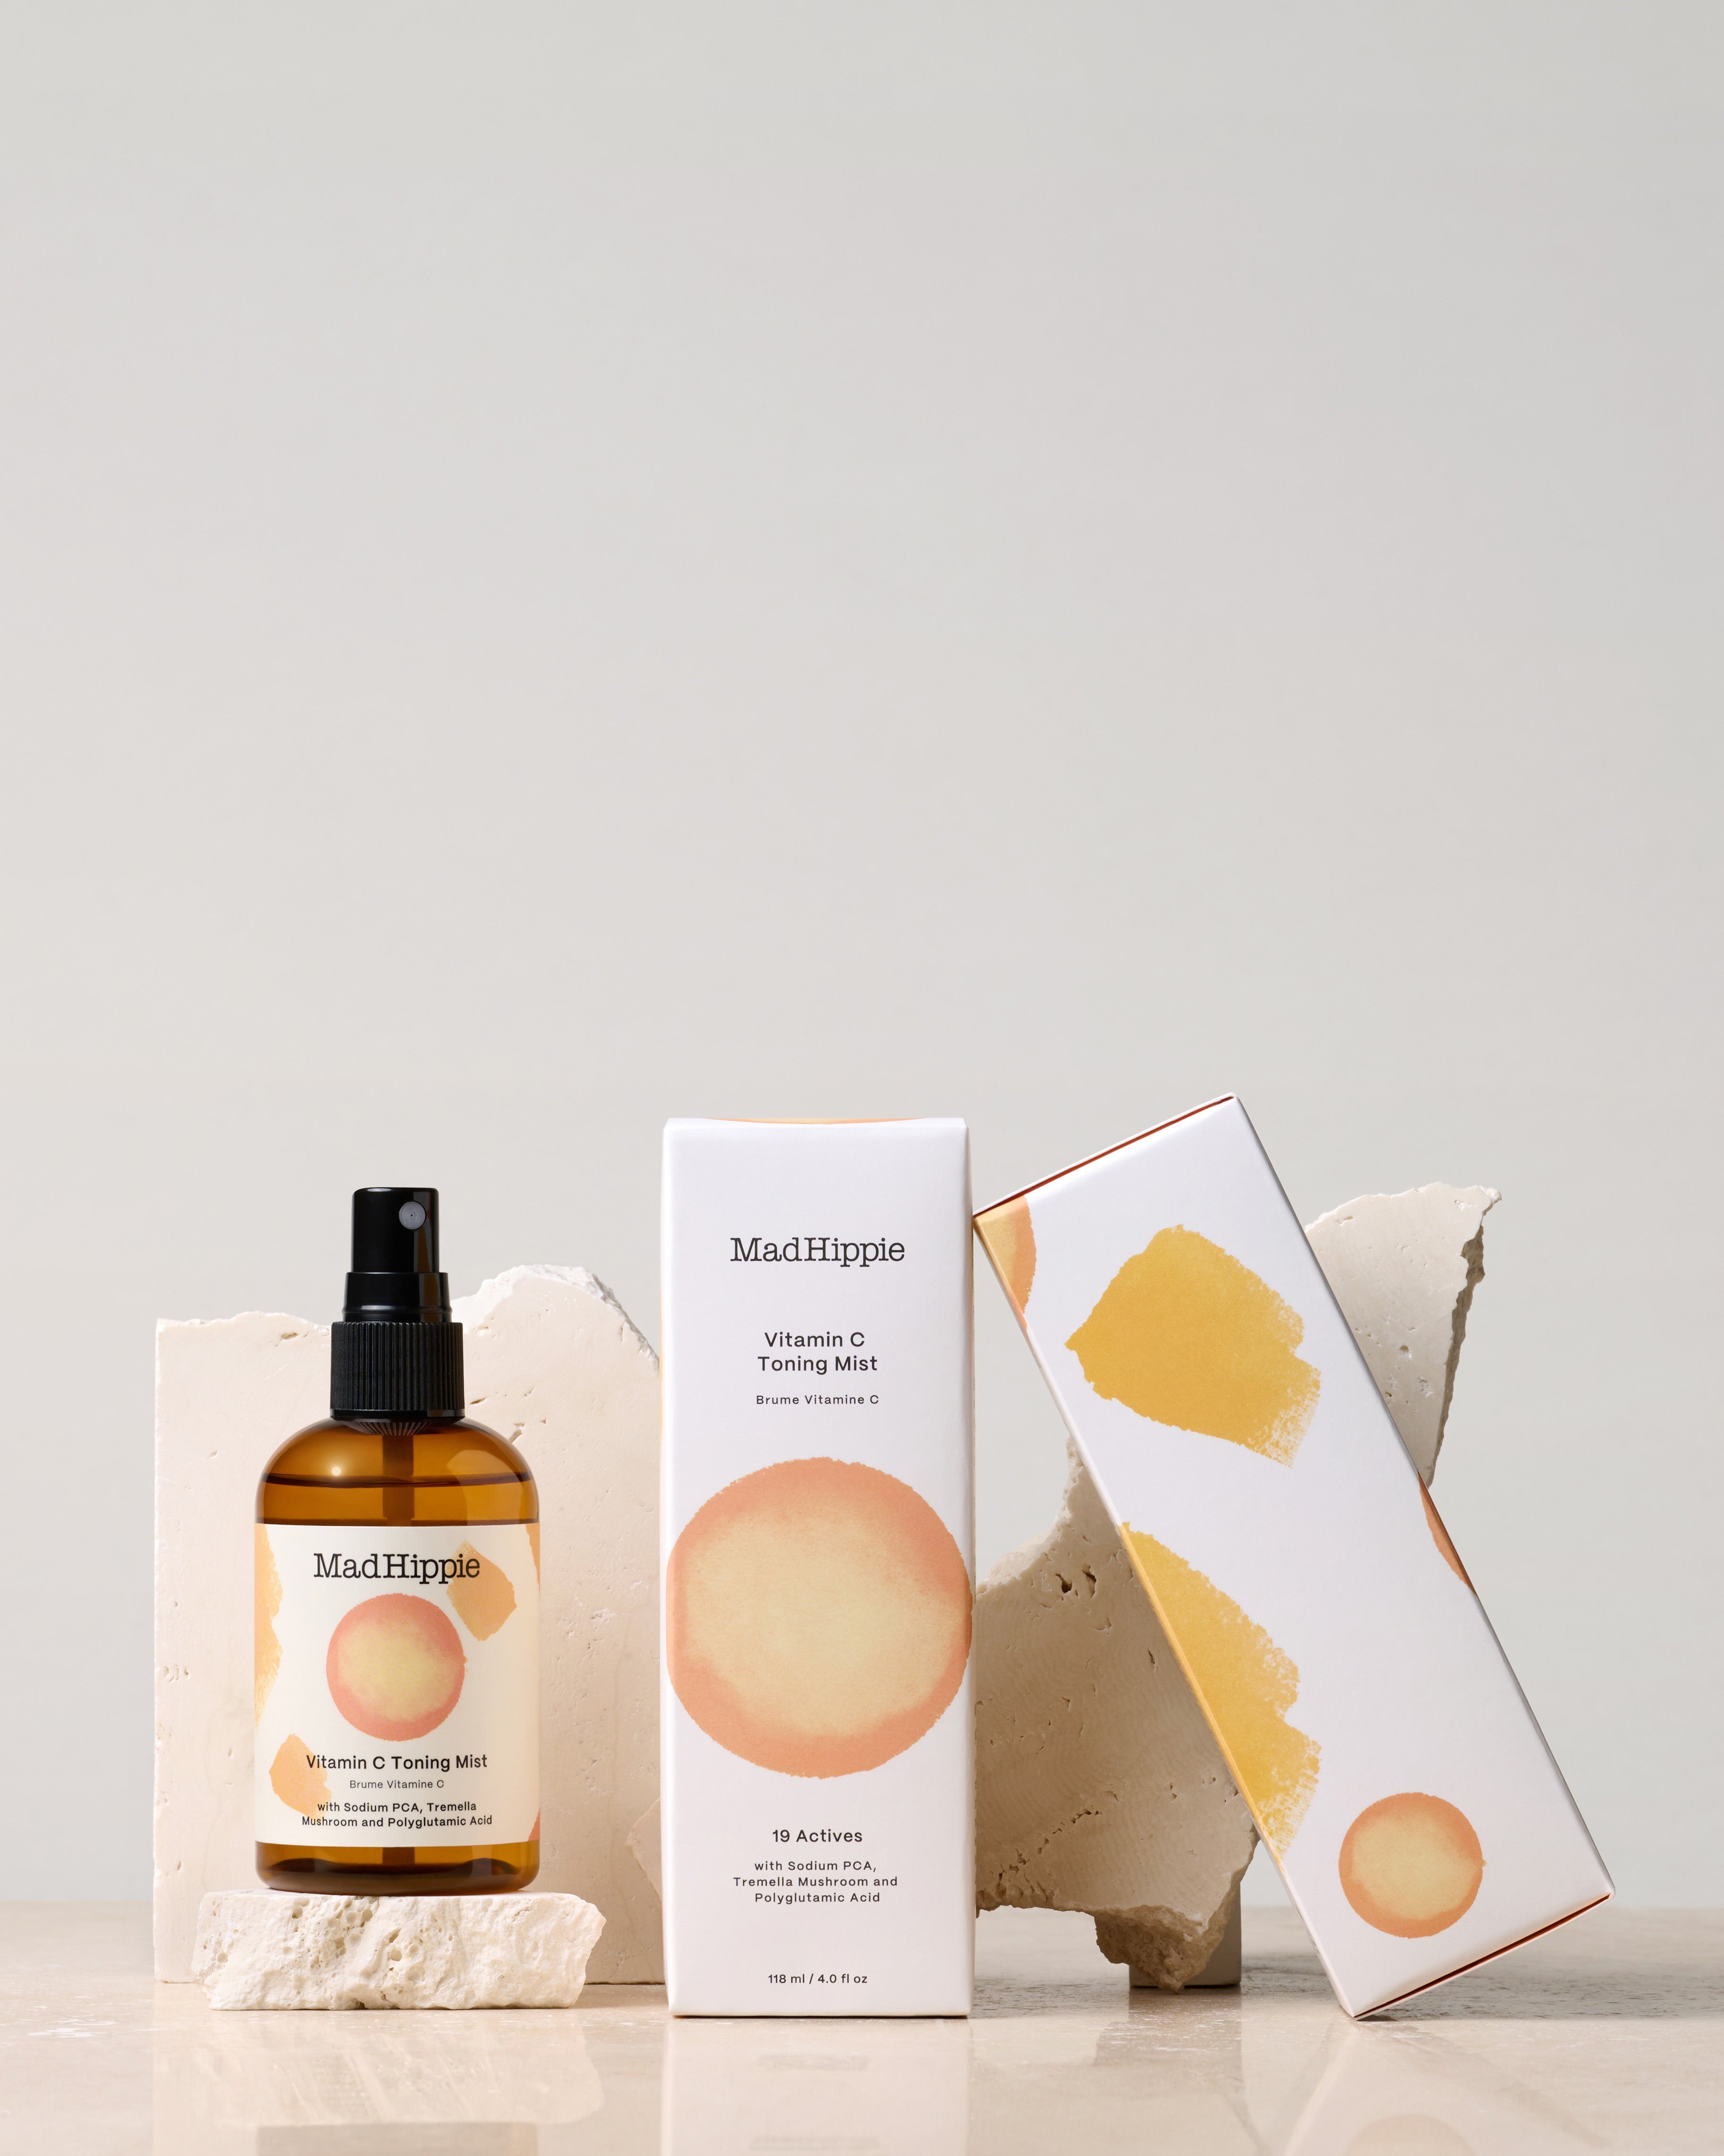 Vitamin C Toning Mist + two boxes in front of stone slabs, with gray background